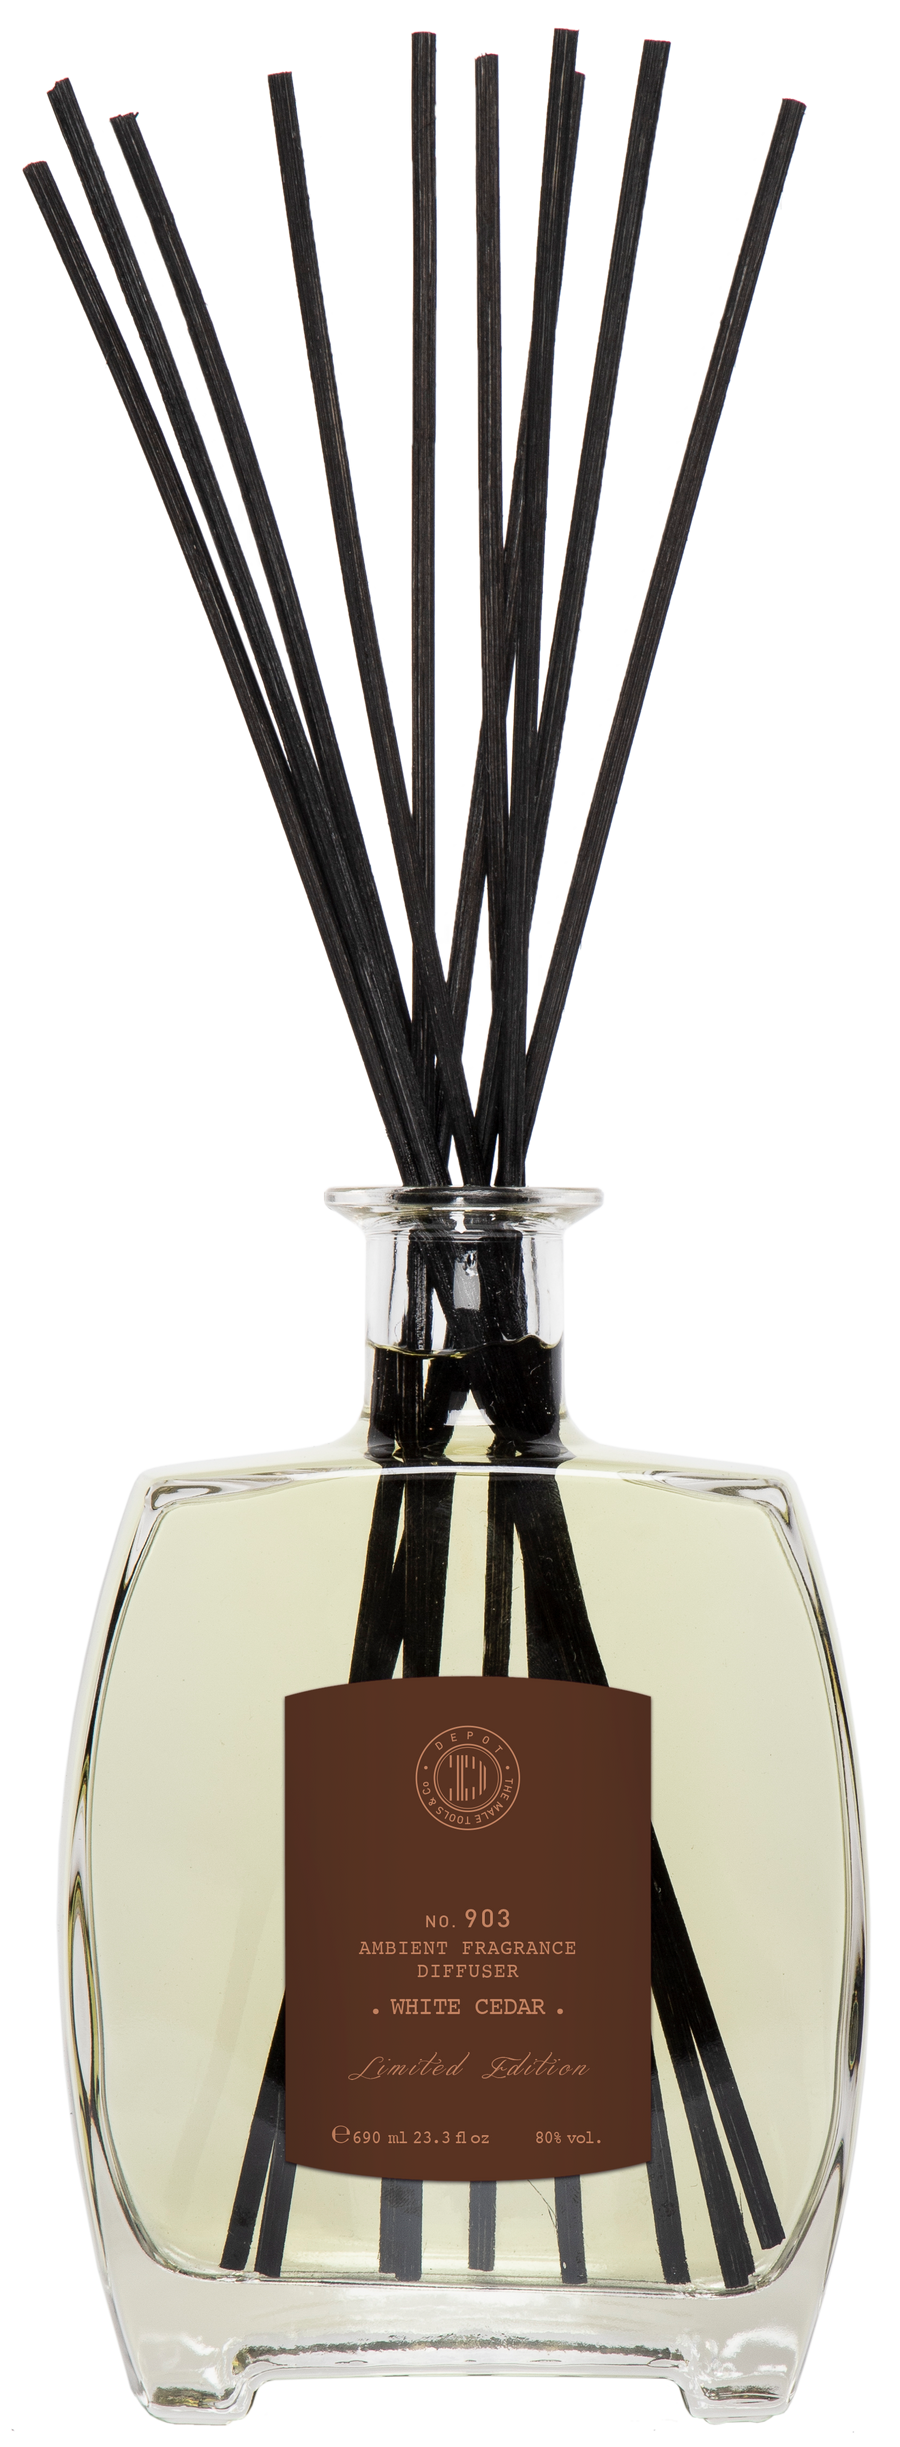 No. 903 Ambient Fragrance Diffuser | Long-Lasting & Aromatic